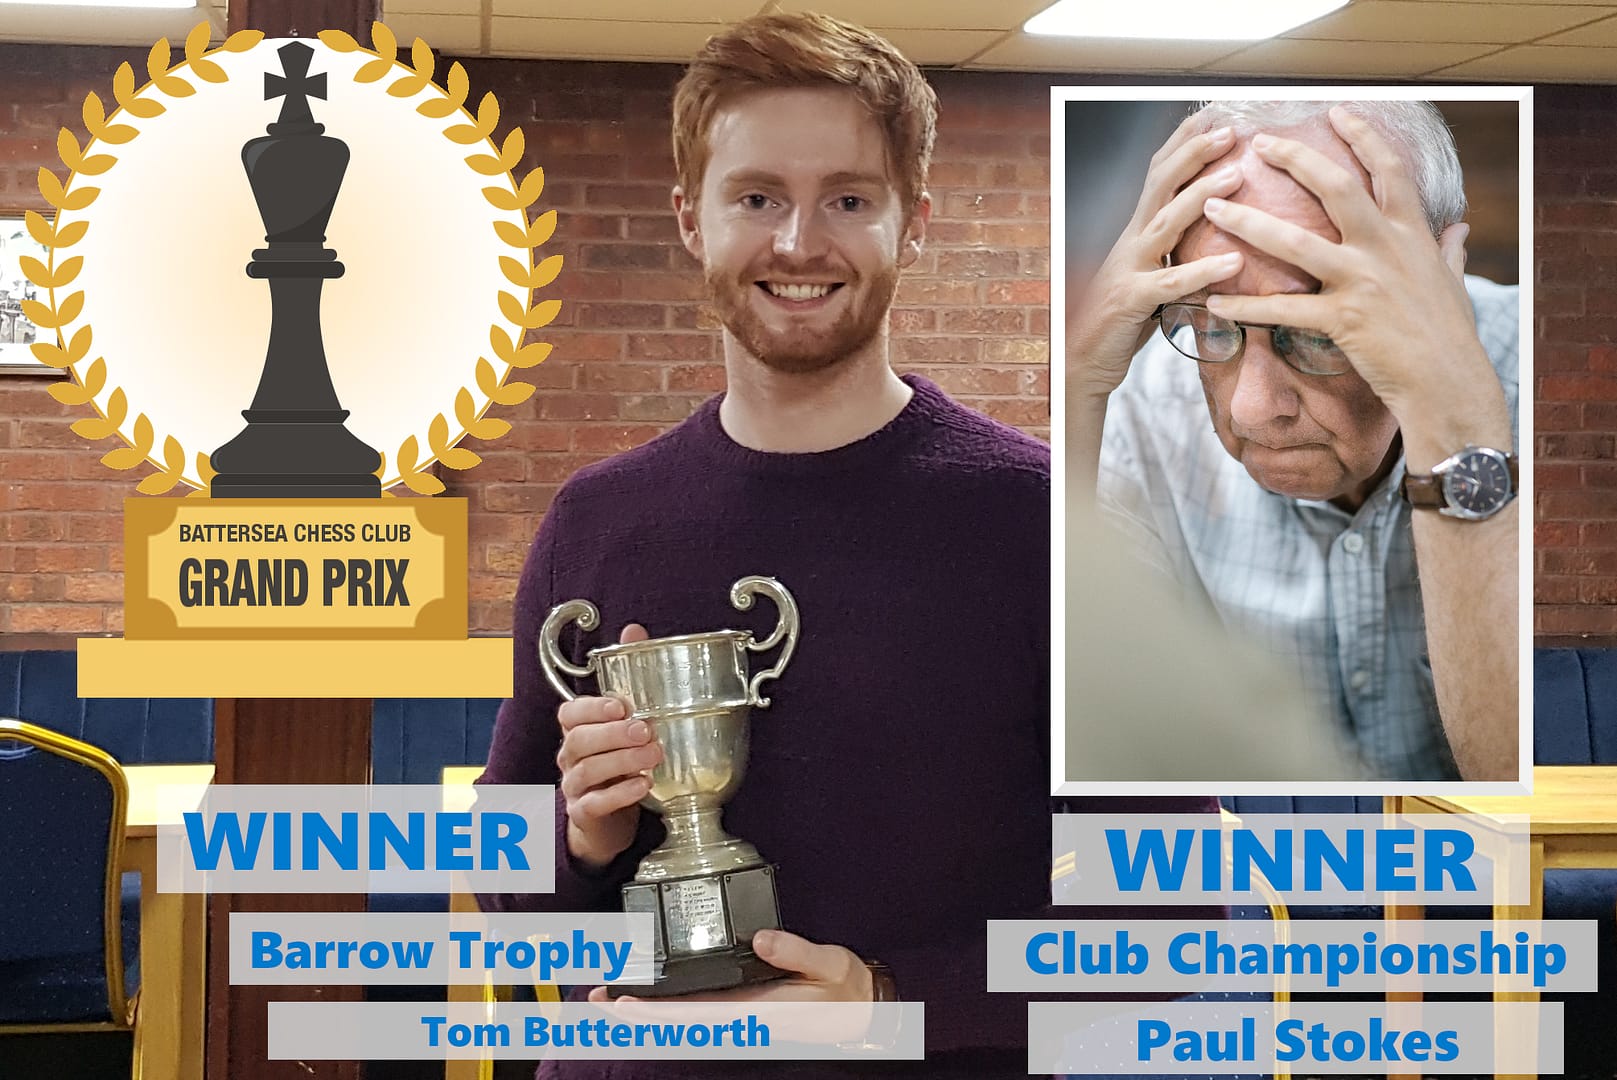 Paul Stokes ends 21 years of hurt to be crowned club champ while Tom Butterworth wins the Barrow